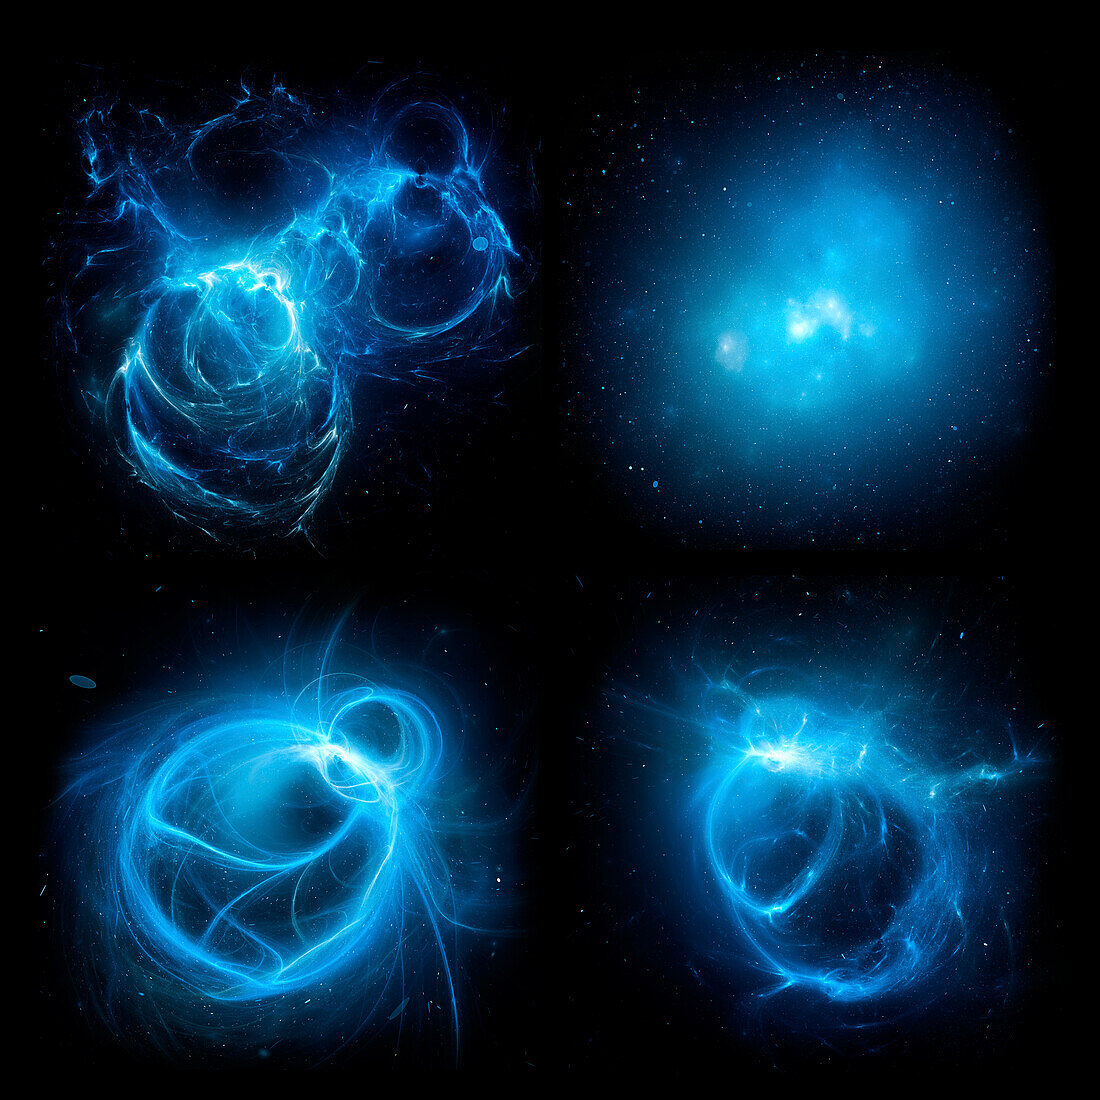 Glowing plasma energy objects in space, illustration